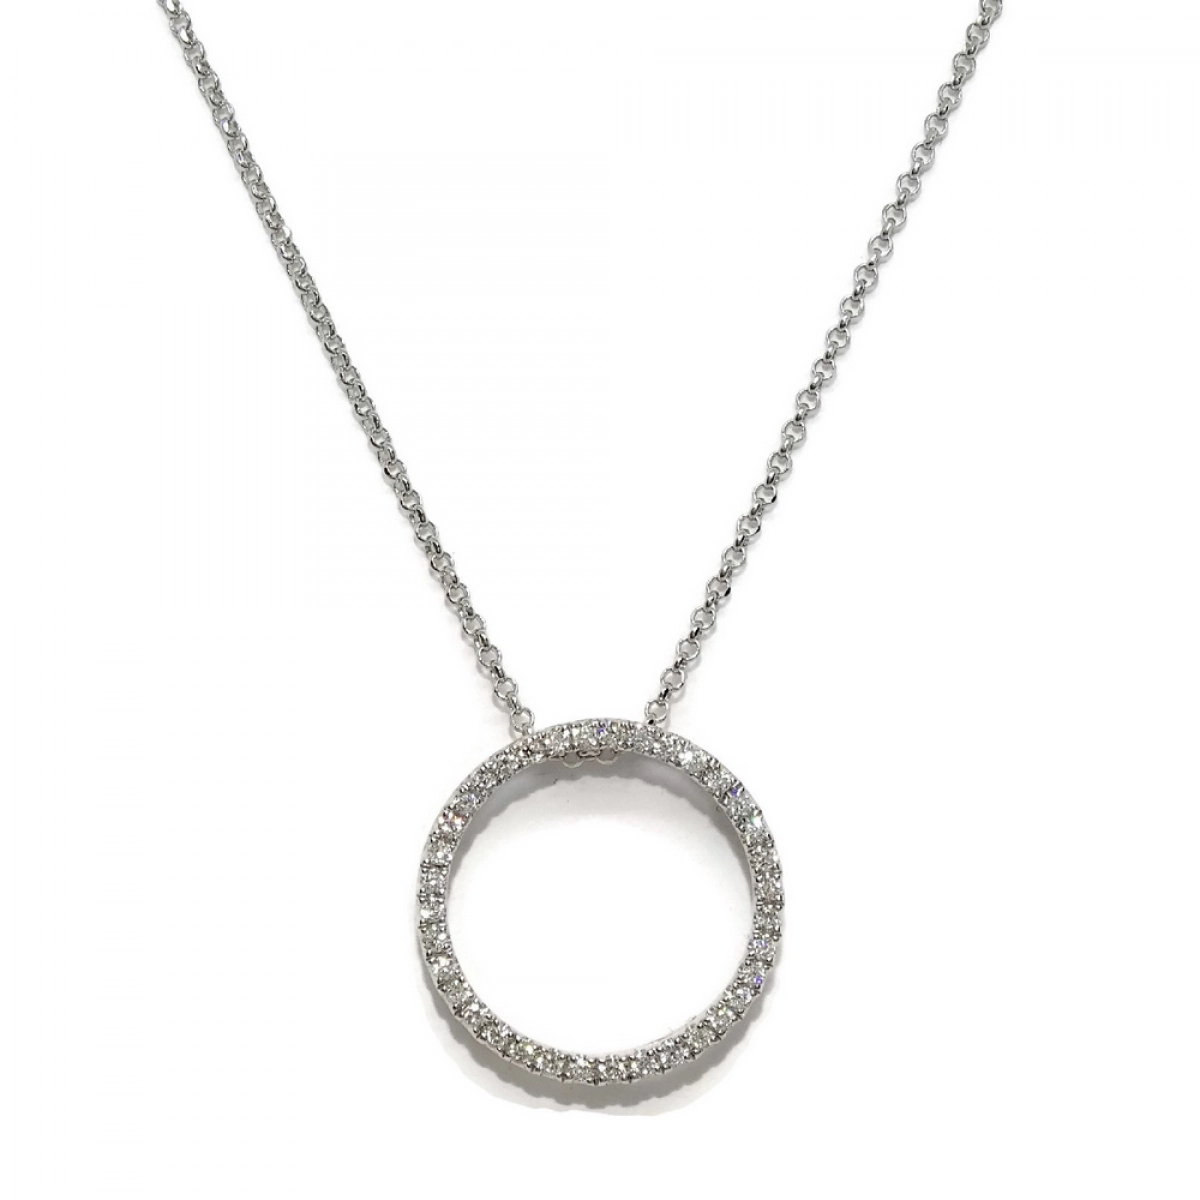 NECKLACE CIRCLE OF 0.15 CTS OF DIAMONDS IN WHITE GOLD 18KTS AND 1.50 CM IN DIAMETER CHAIN ROLO 18K NEVER SAY NEVER